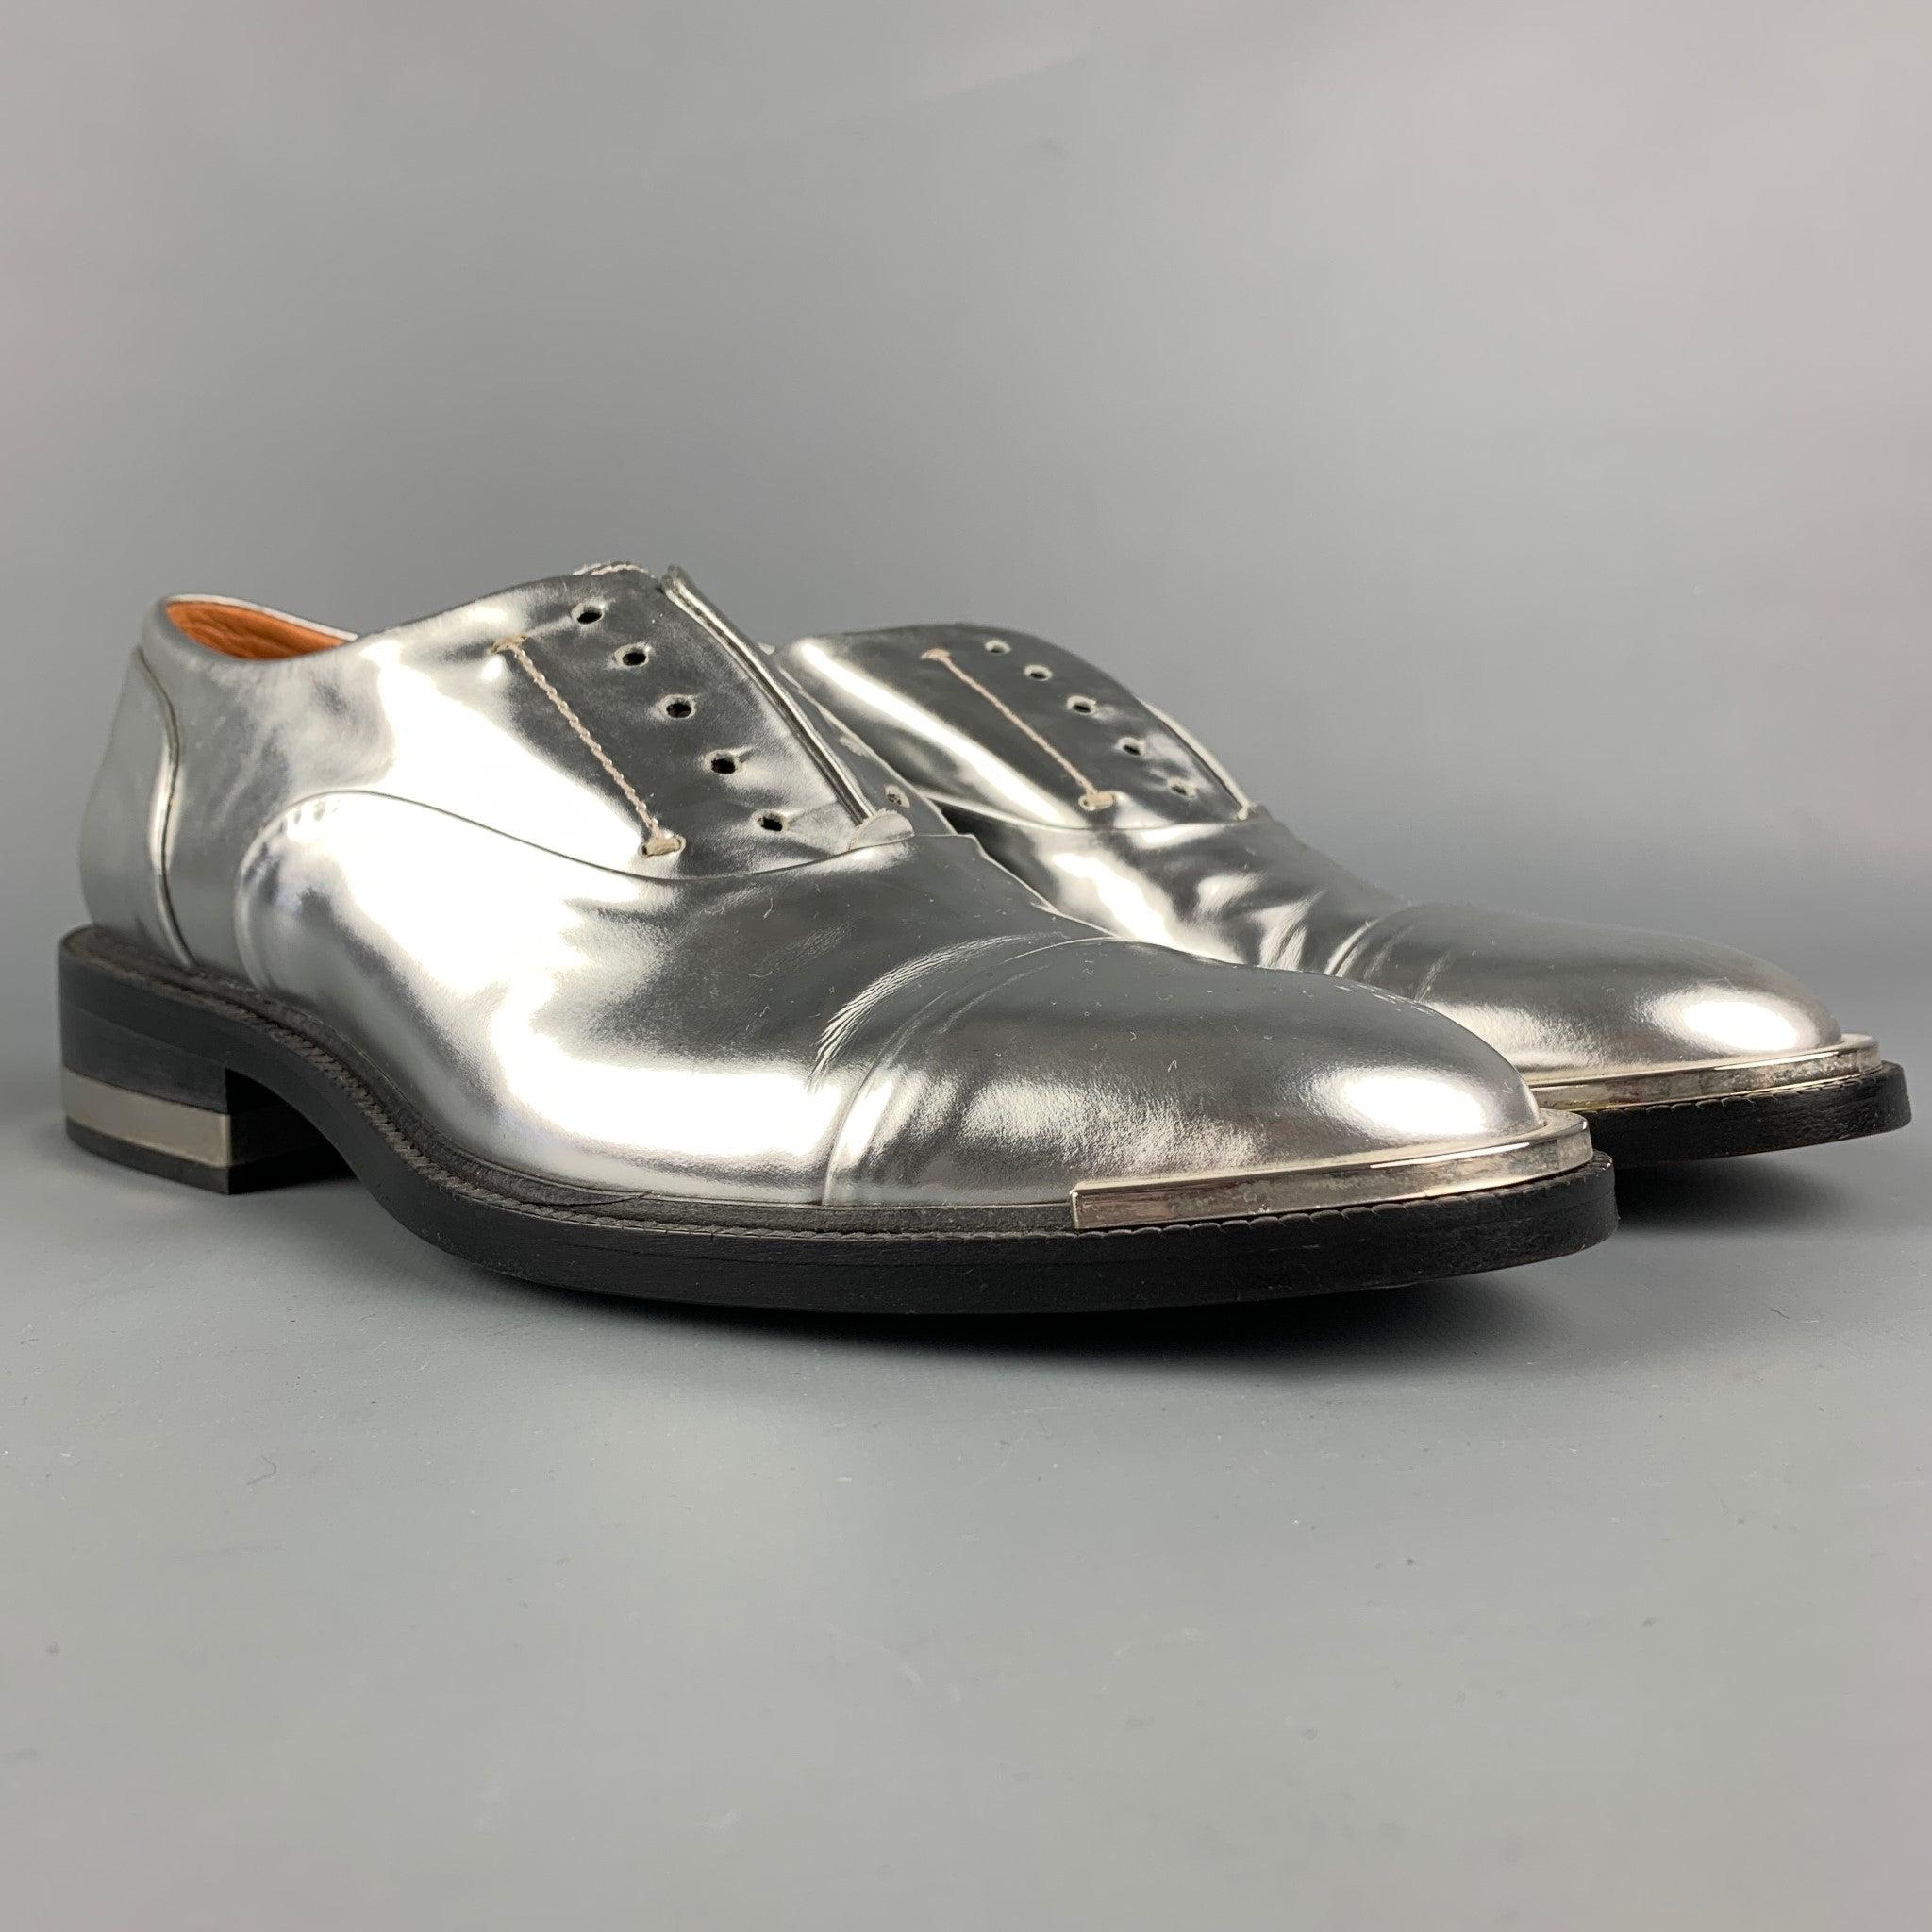 BARBARA BUI shoes comes in a silver metallic leather featuring a cap toe, metal trim, and a laceless style.
Very Good
Pre-Owned Condition. 

Marked:   37Outsole: 10.5 inches  x 3.75 inches 
  
  
 
Reference: 113003
Category: Laces
More Details
   